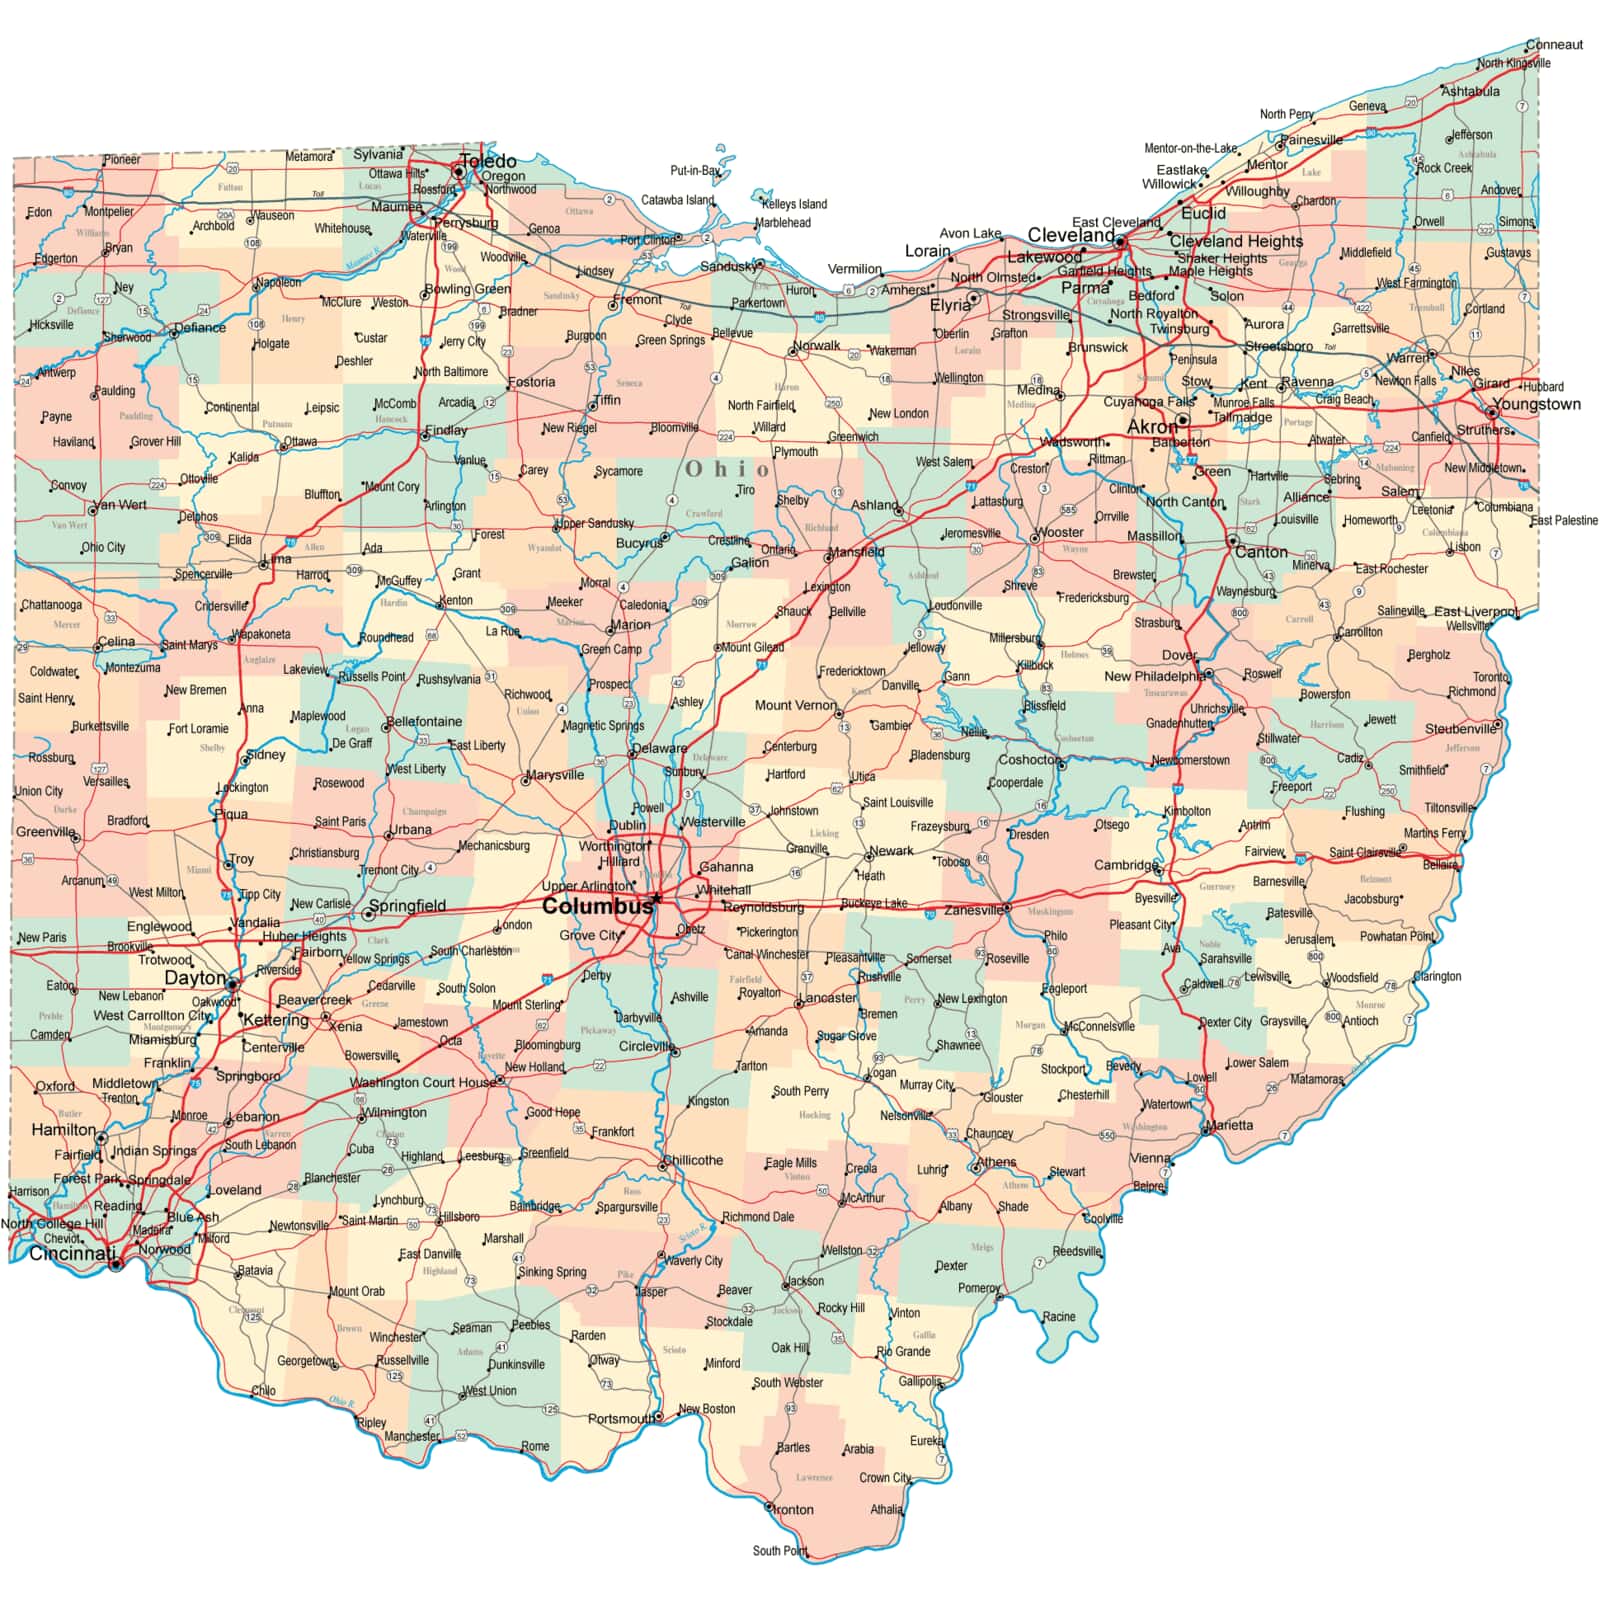 County Map Of Ohio With Roads Ohio Road Map   OH Road Map   Ohio Roads and Highways